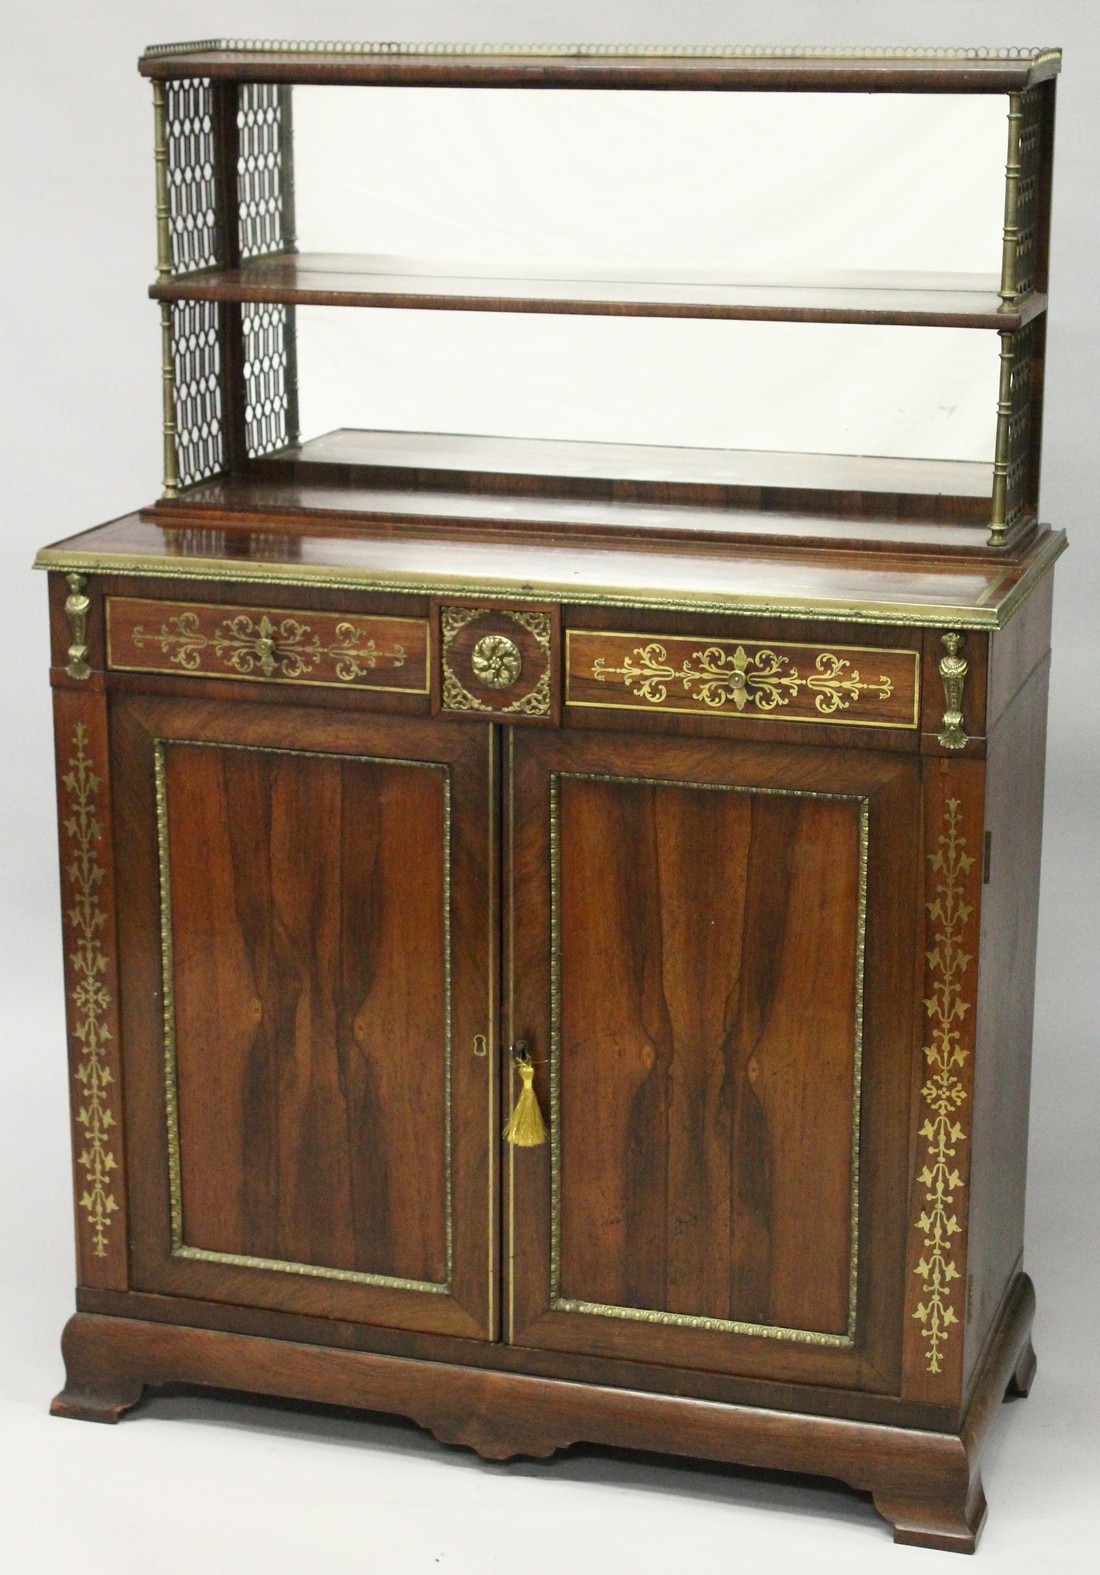 A SUPERB REGENCY ROSEWOOD BRASS INLAID CHIFFONIER in the manner of JOHN MC LEAN, with book shelf - Image 2 of 16